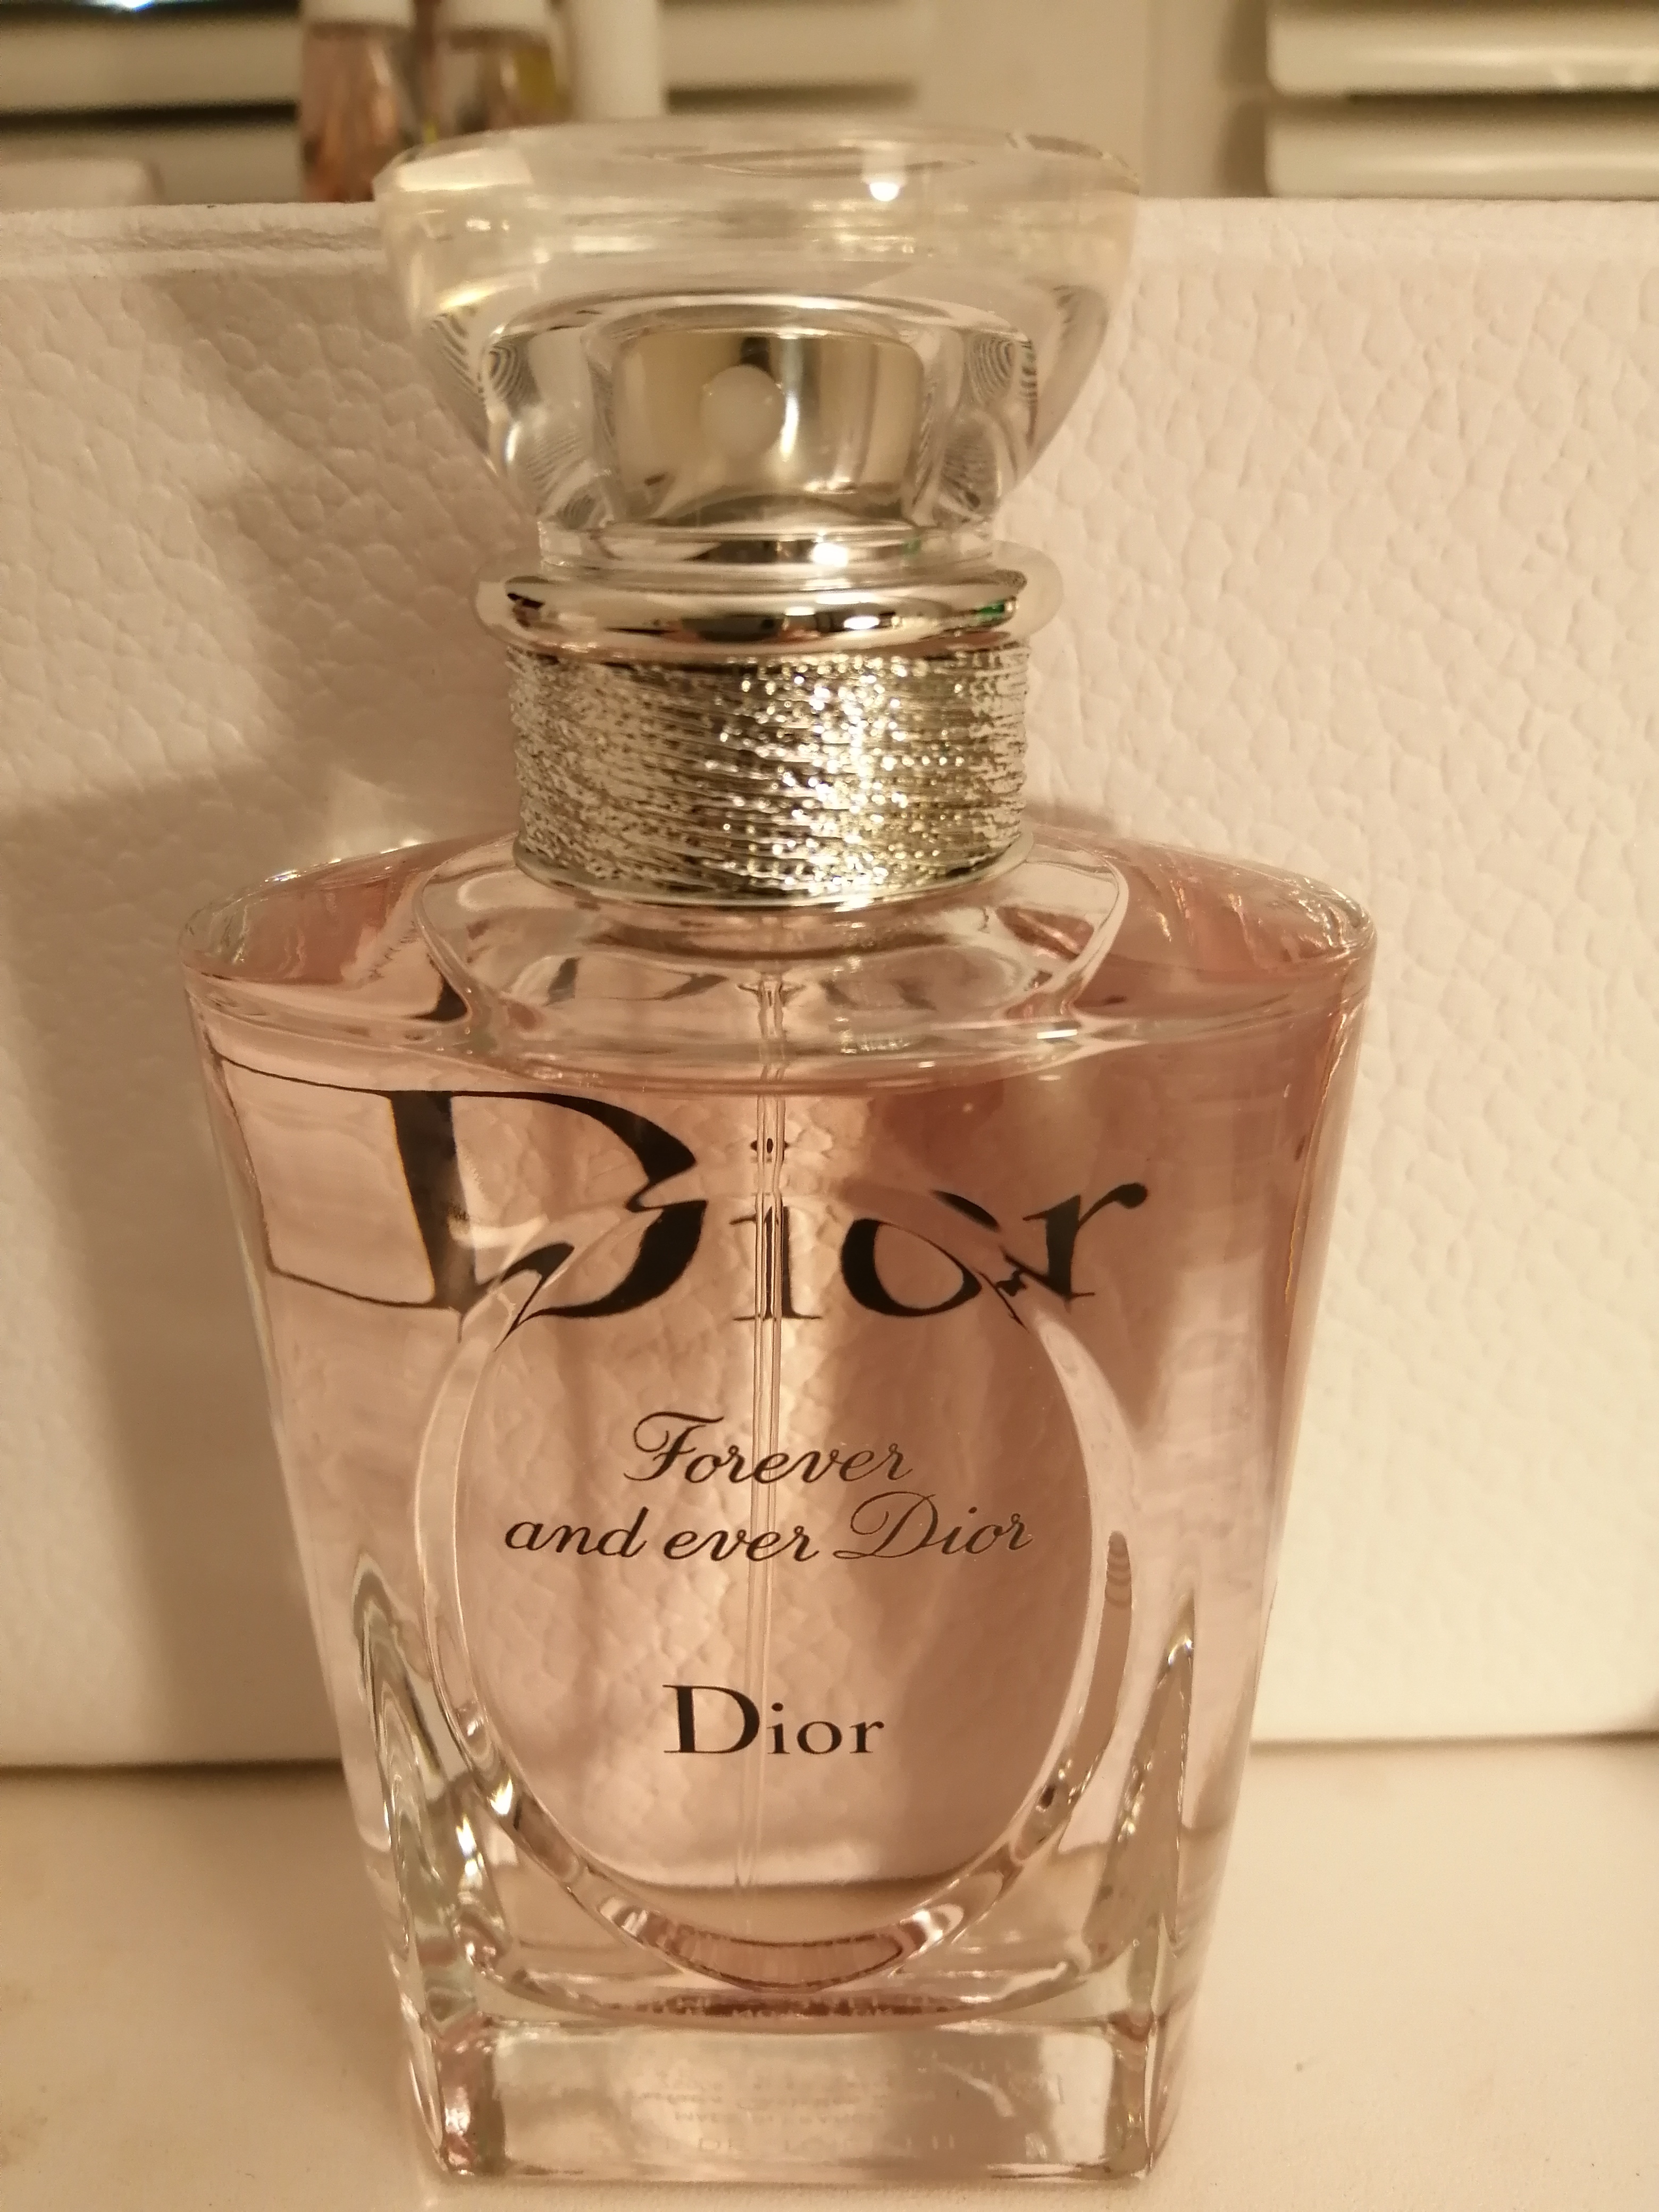      Forever & Ever Dior   -welcome)!   ,     ң  )  15 